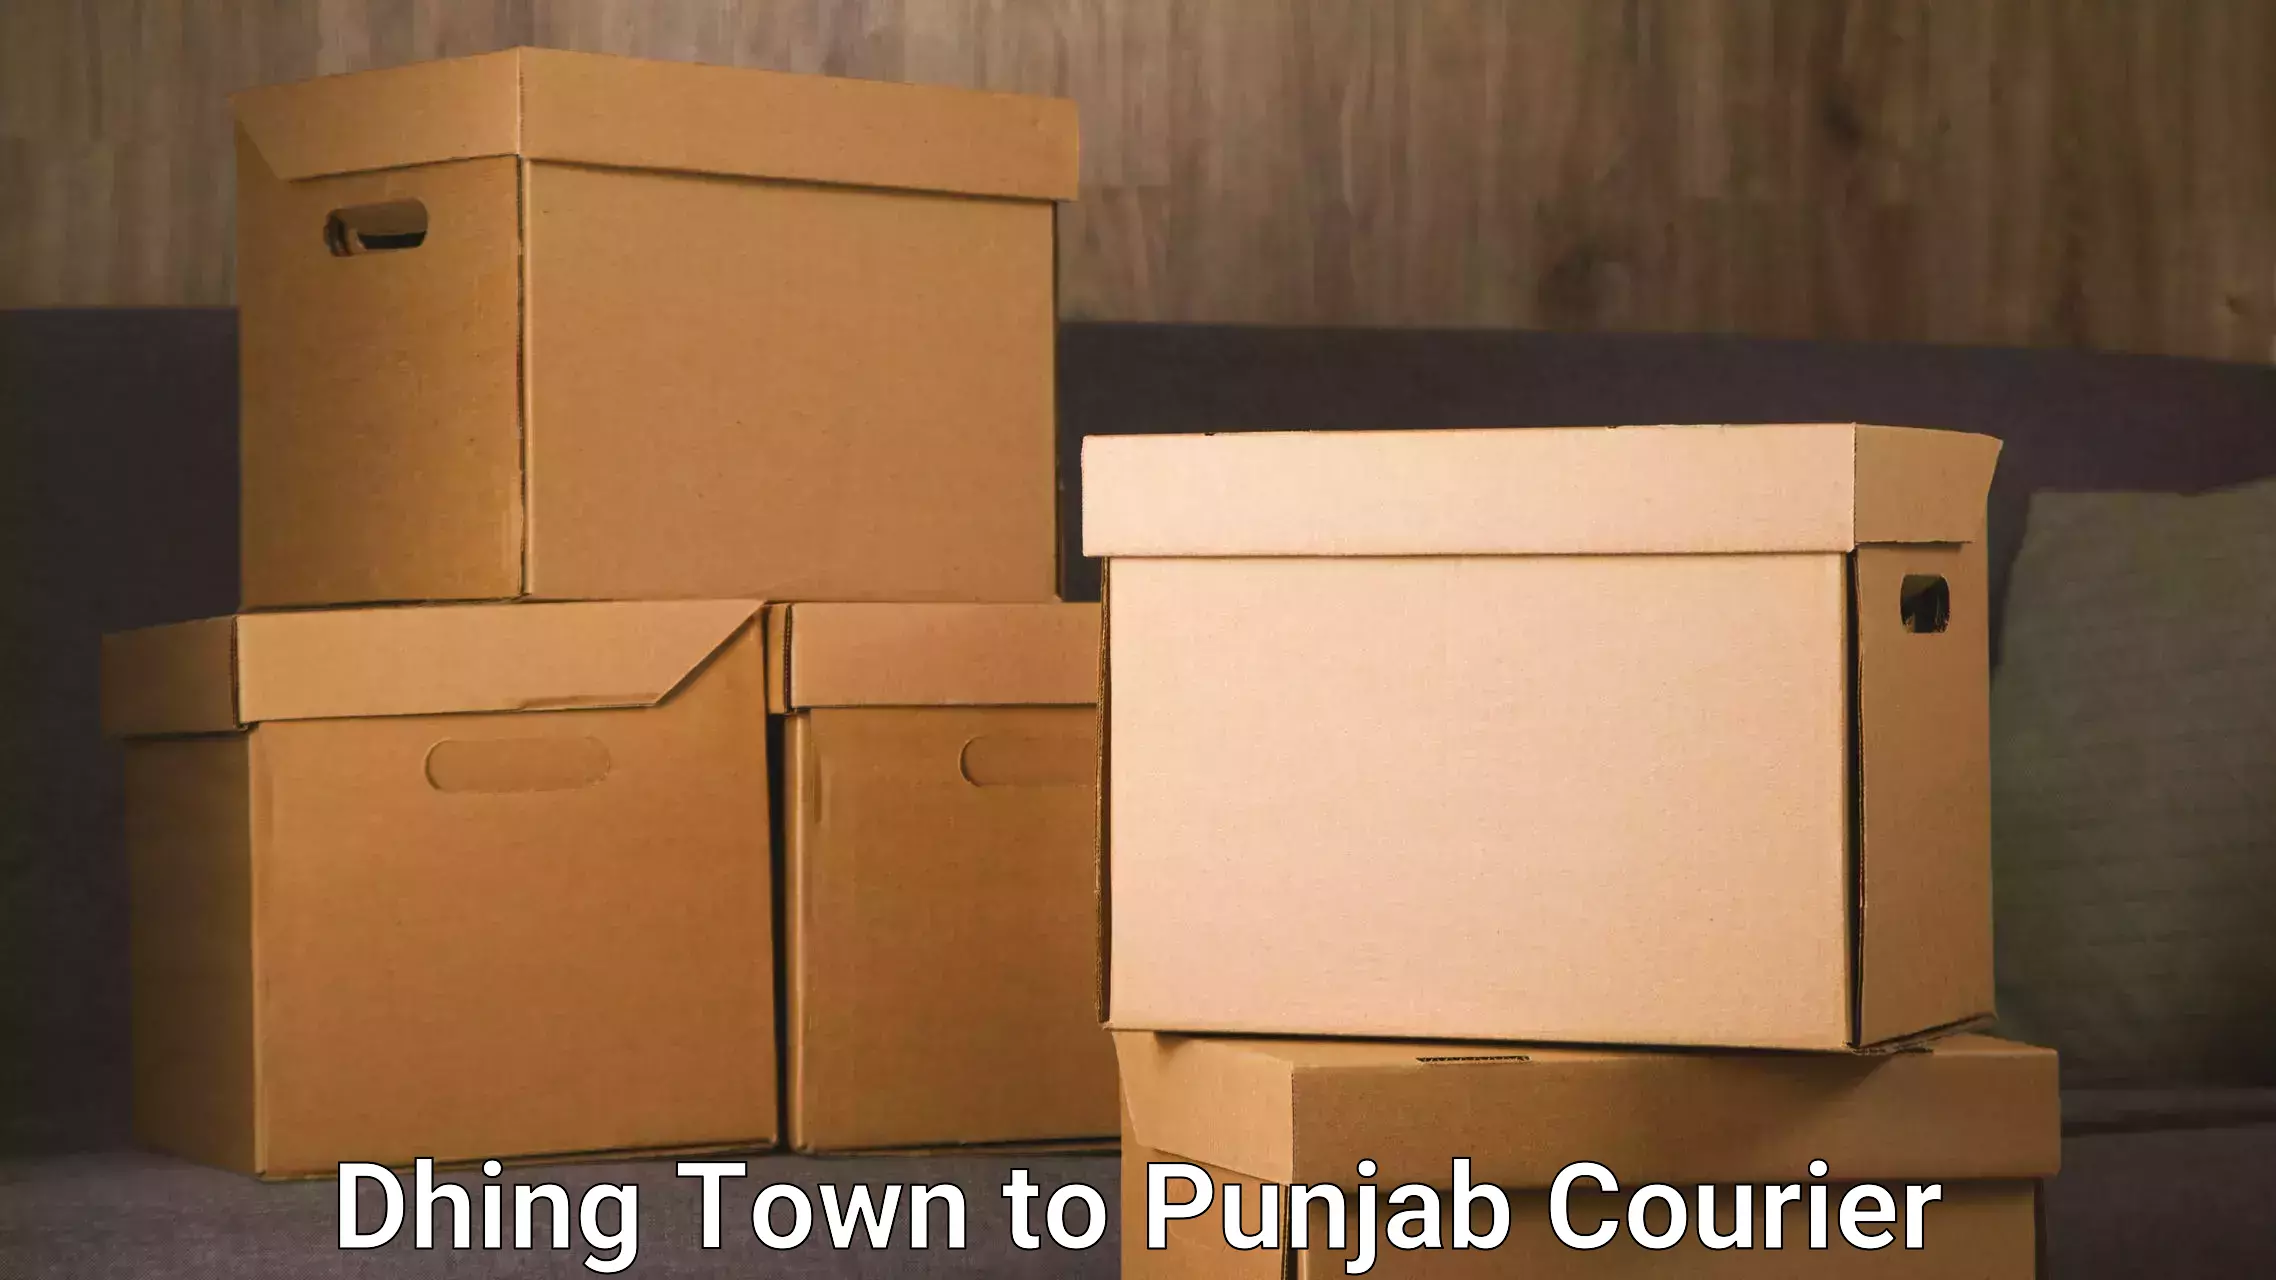 Nationwide courier service Dhing Town to Pathankot